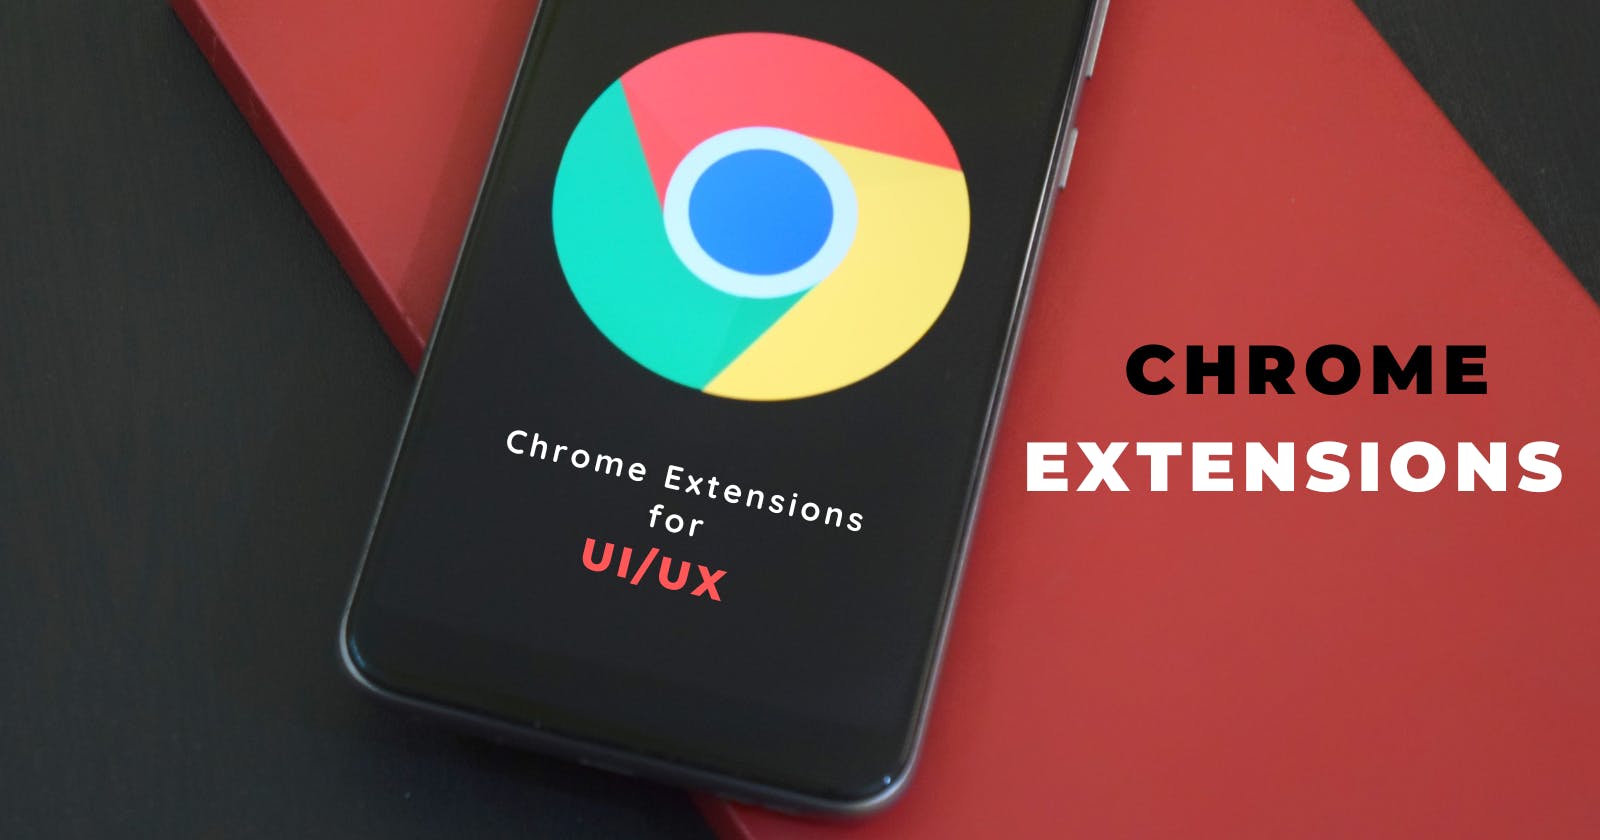 Chrome Extensions for UI/UX